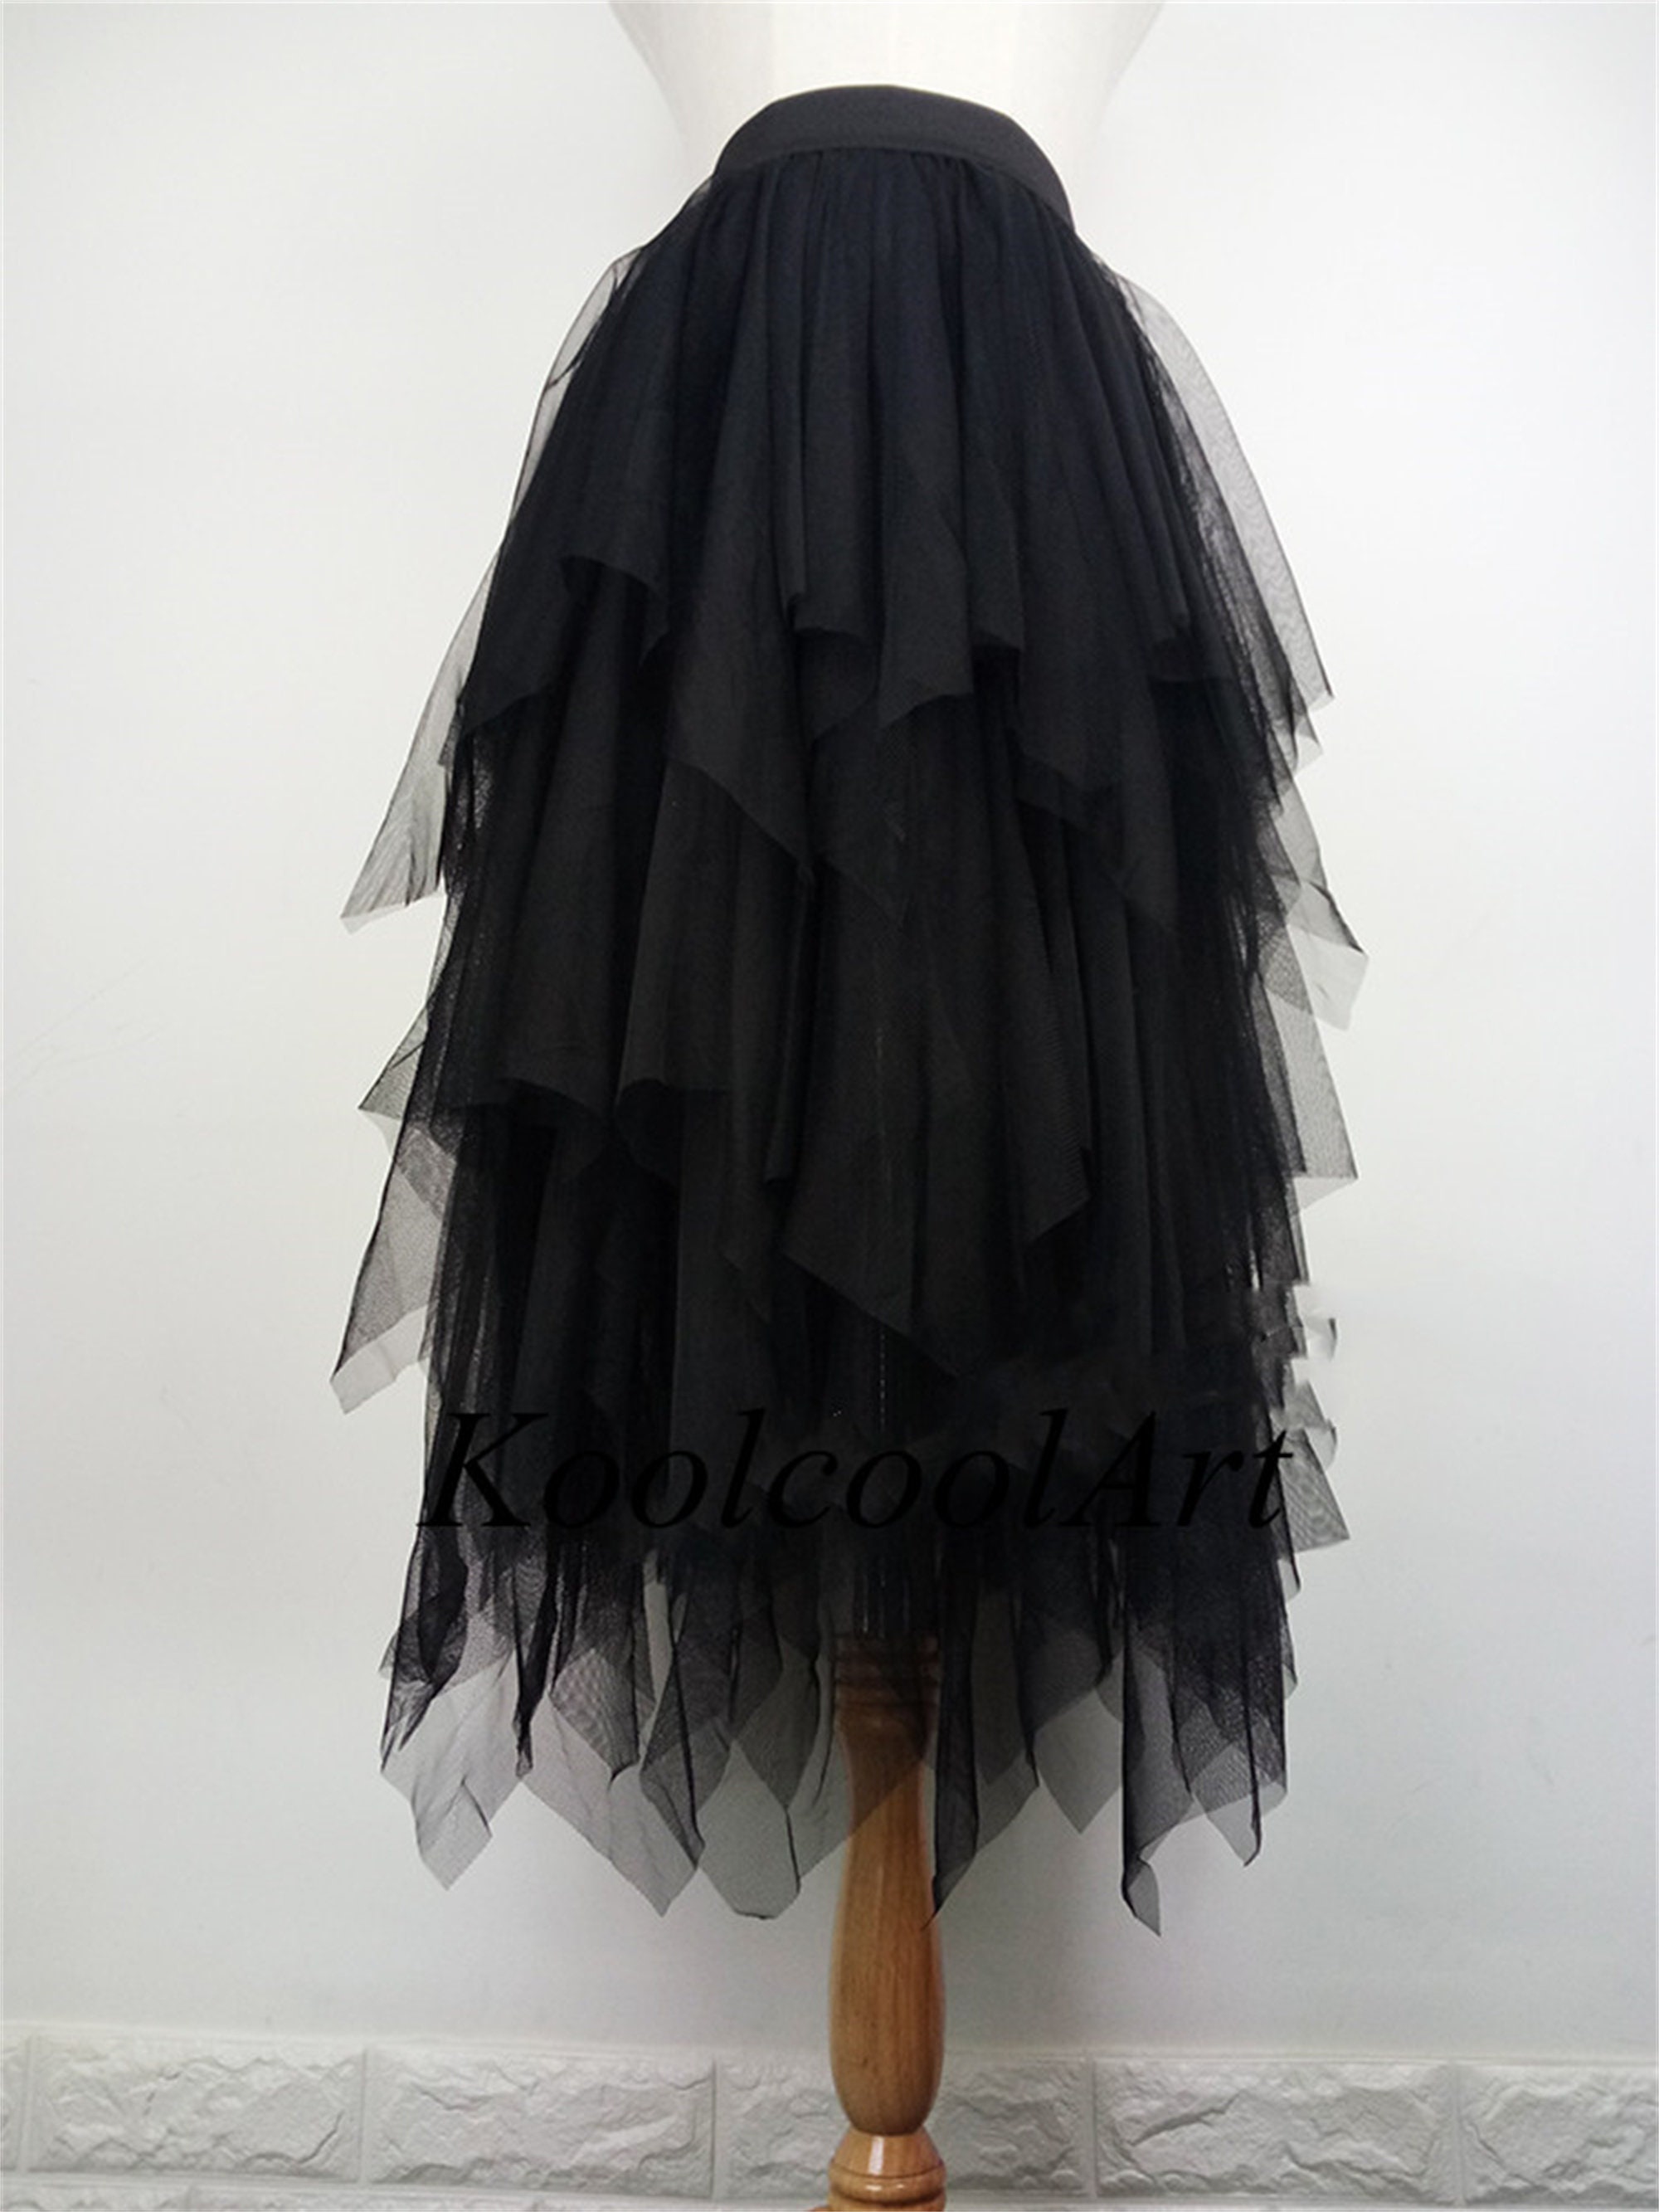 Black Tulle Topshop Skirts, Black Alma Bb Louis Vuitton Bags, Ruffles x  Tulle by quennandher